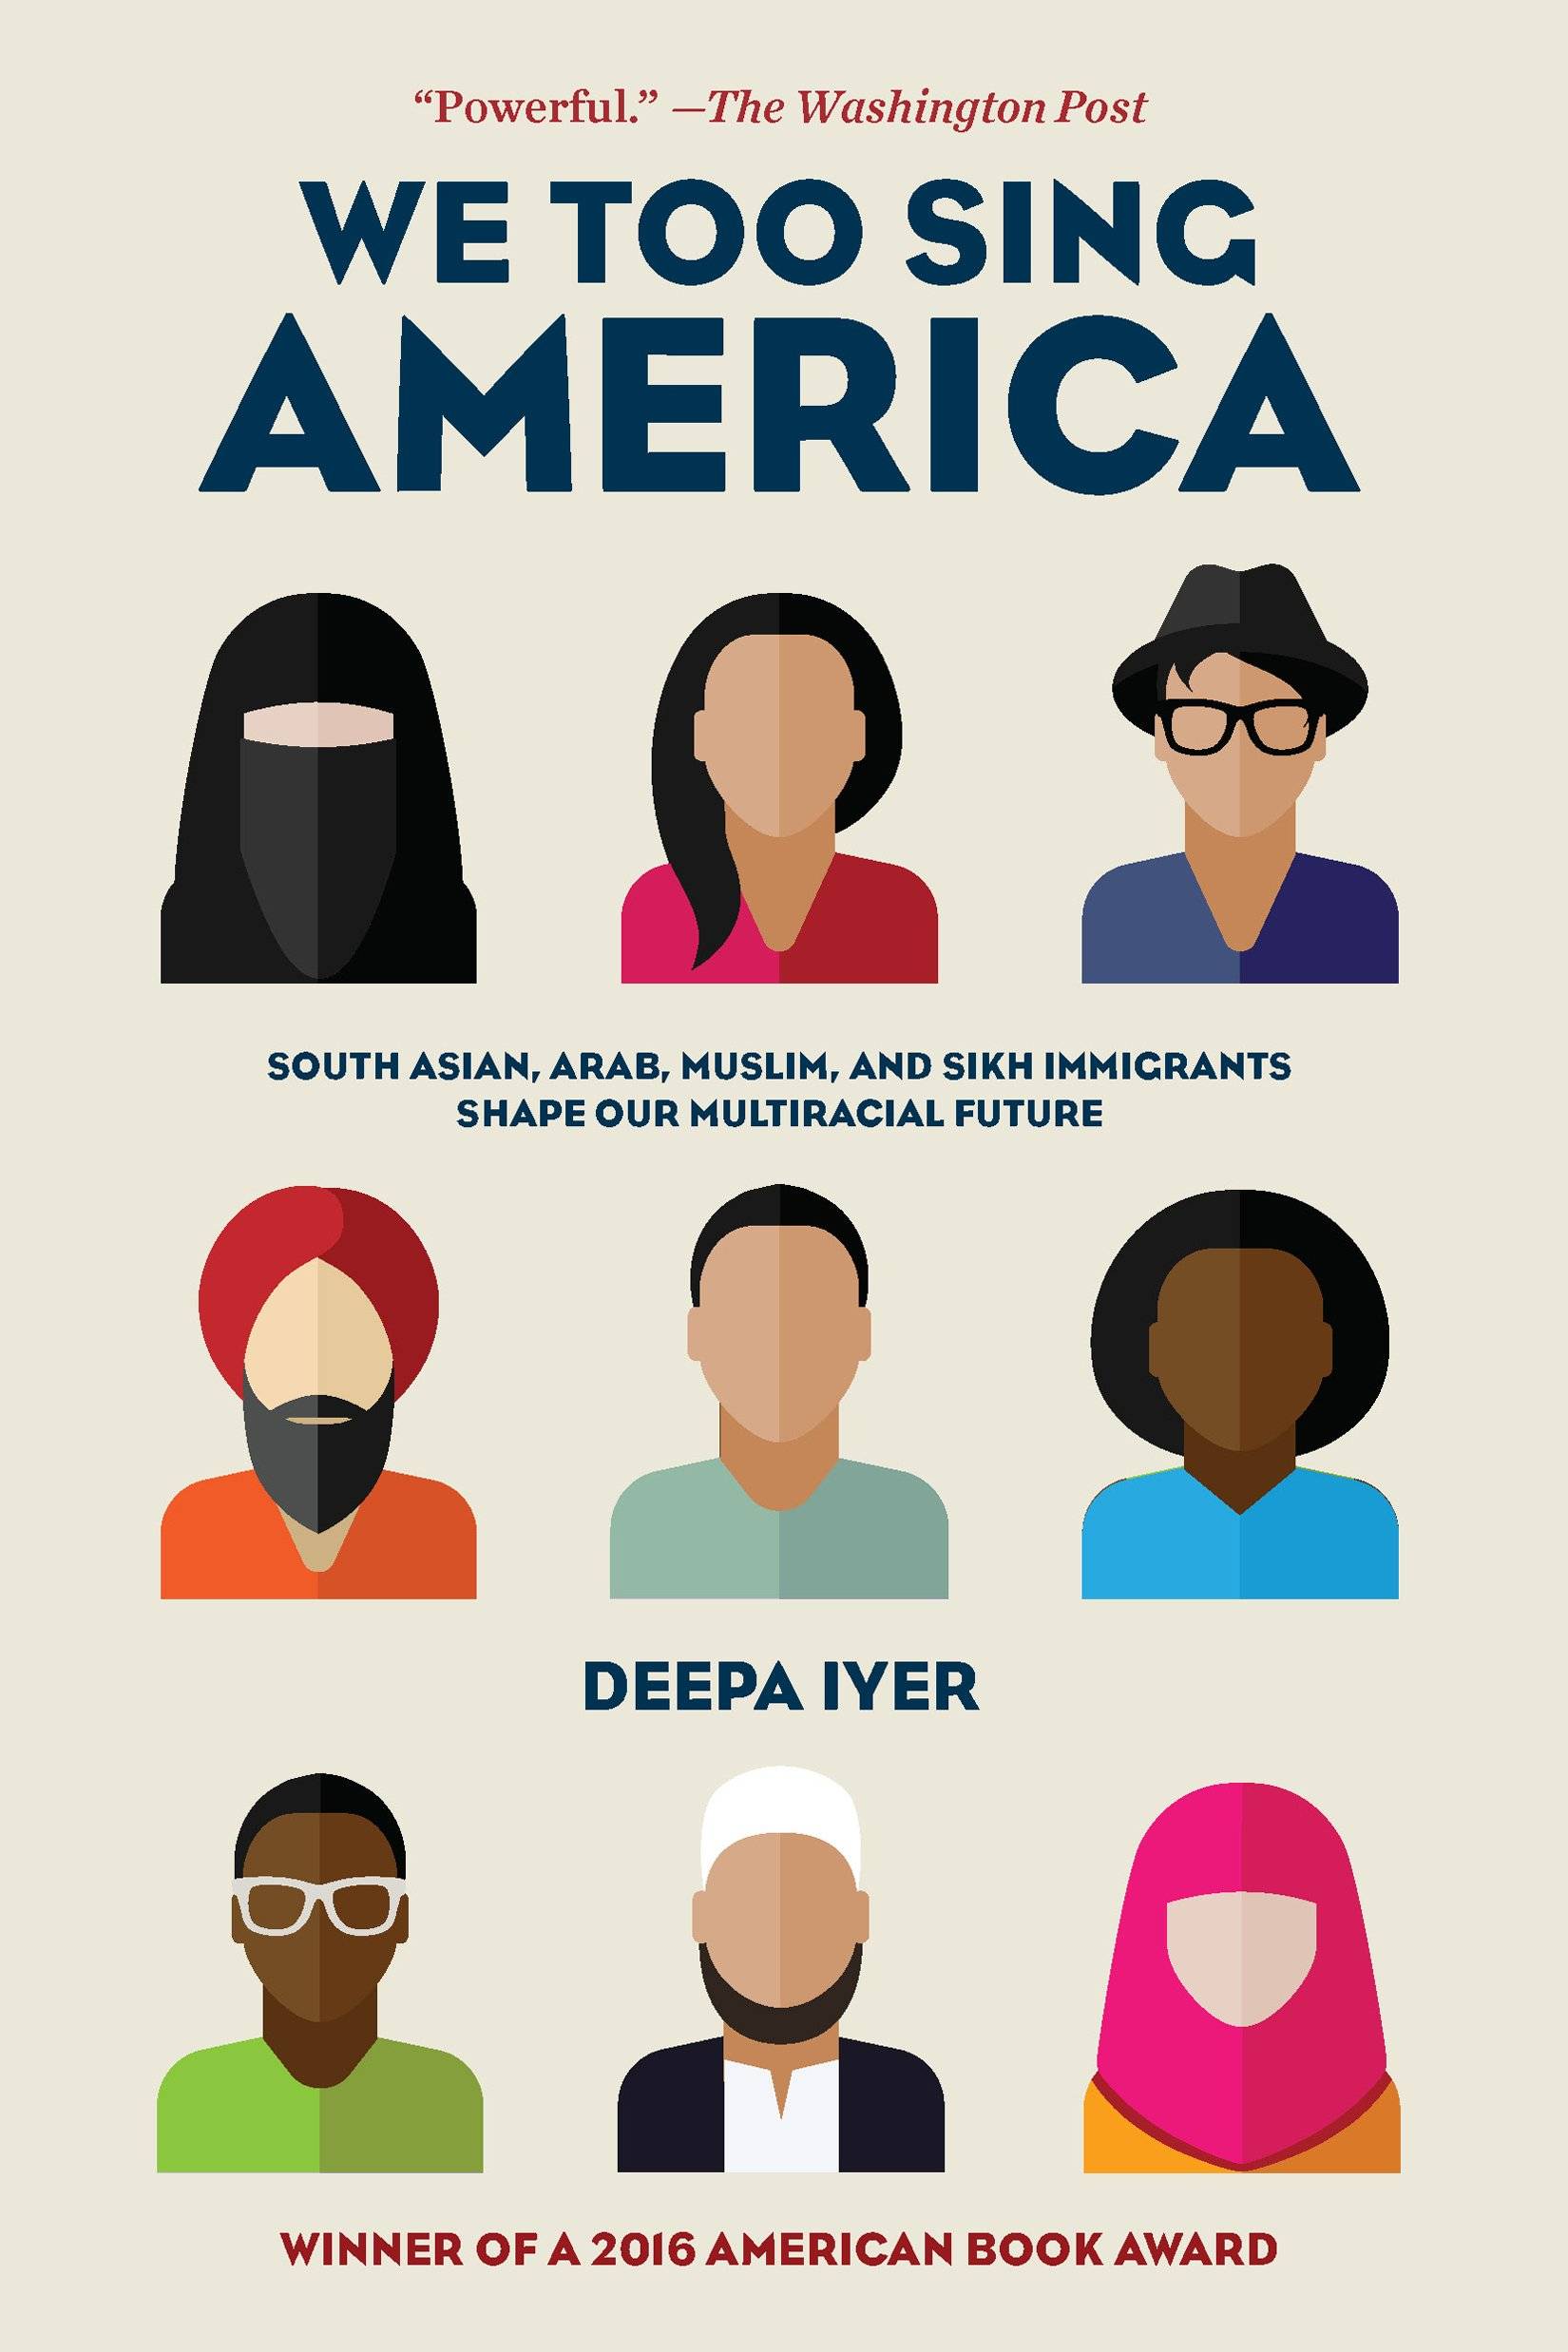 "We Too Sing America" book cover featuring simplified and colorful graphics of different looking people.